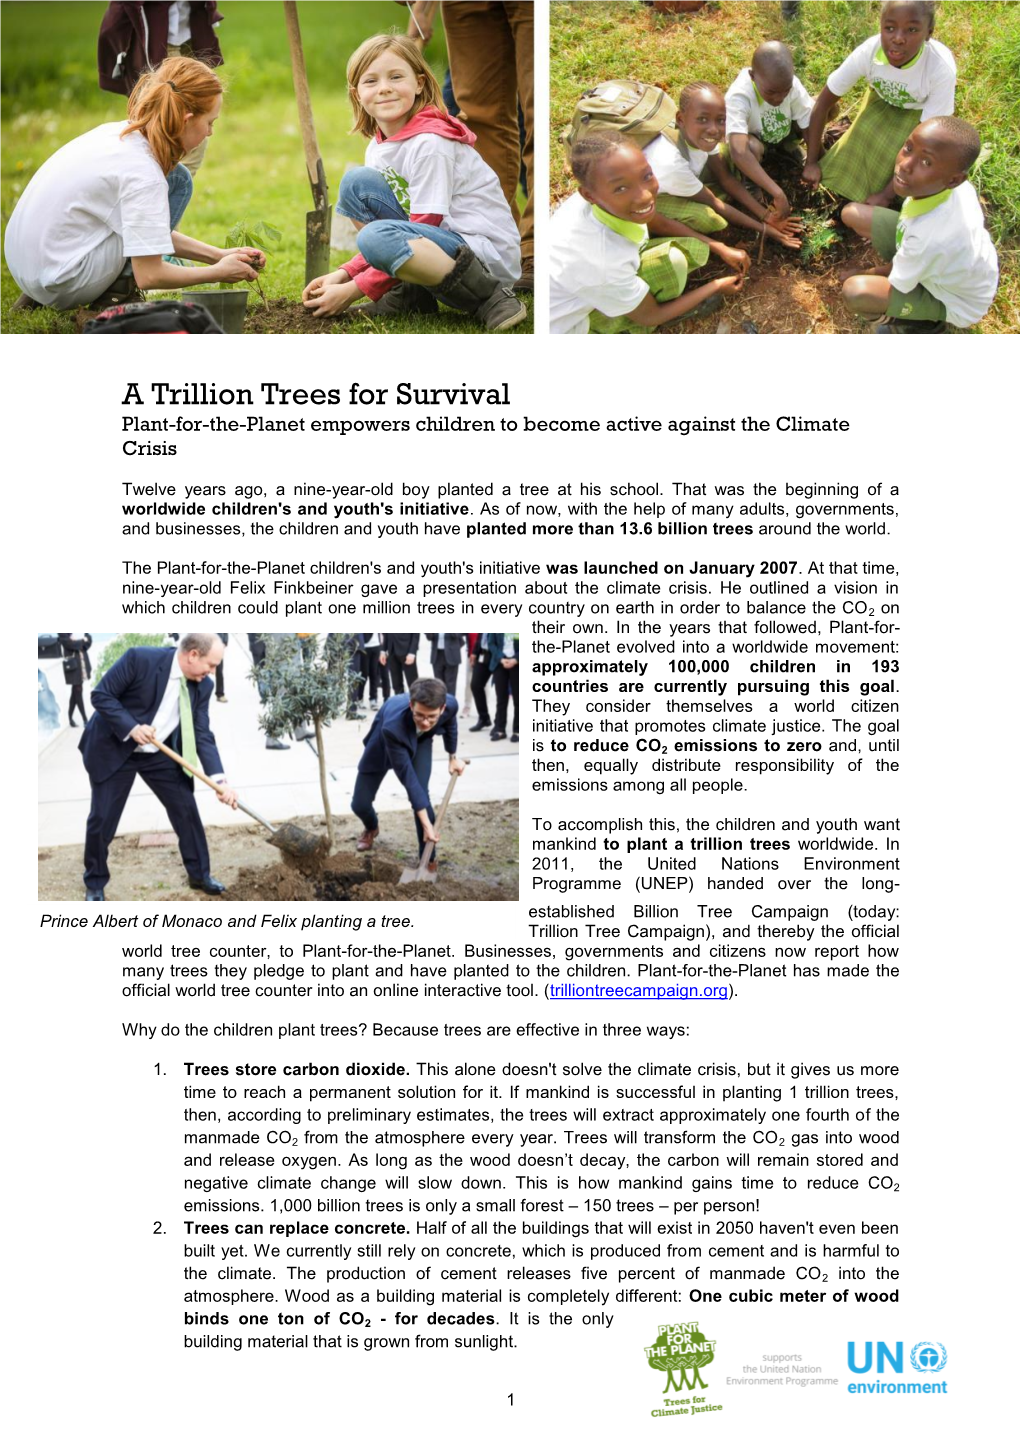 A Trillion Trees for Survival Plant-For-The-Planet Empowers Children to Become Active Against the Climate Crisis